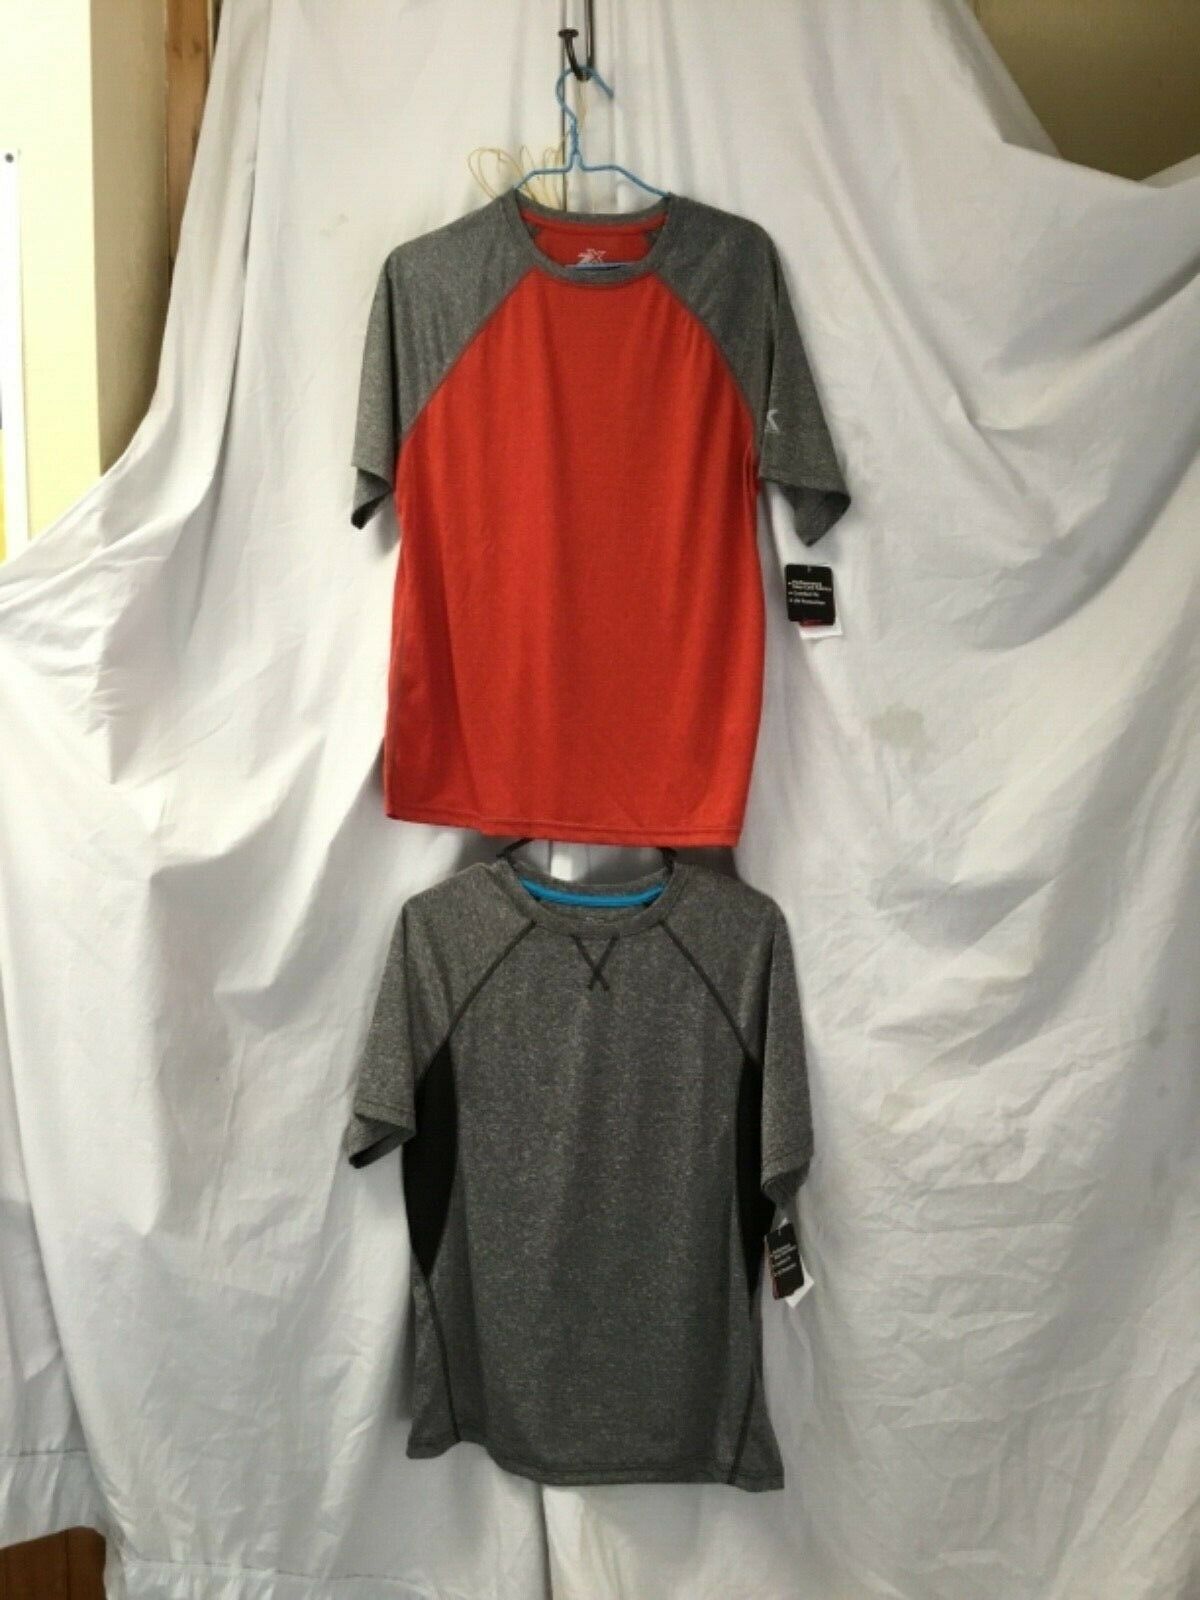 ZeroXposur Boys L 14-16 UPF 20+ Sun Protection Shirt Red and gray lot of 2 - $15.83